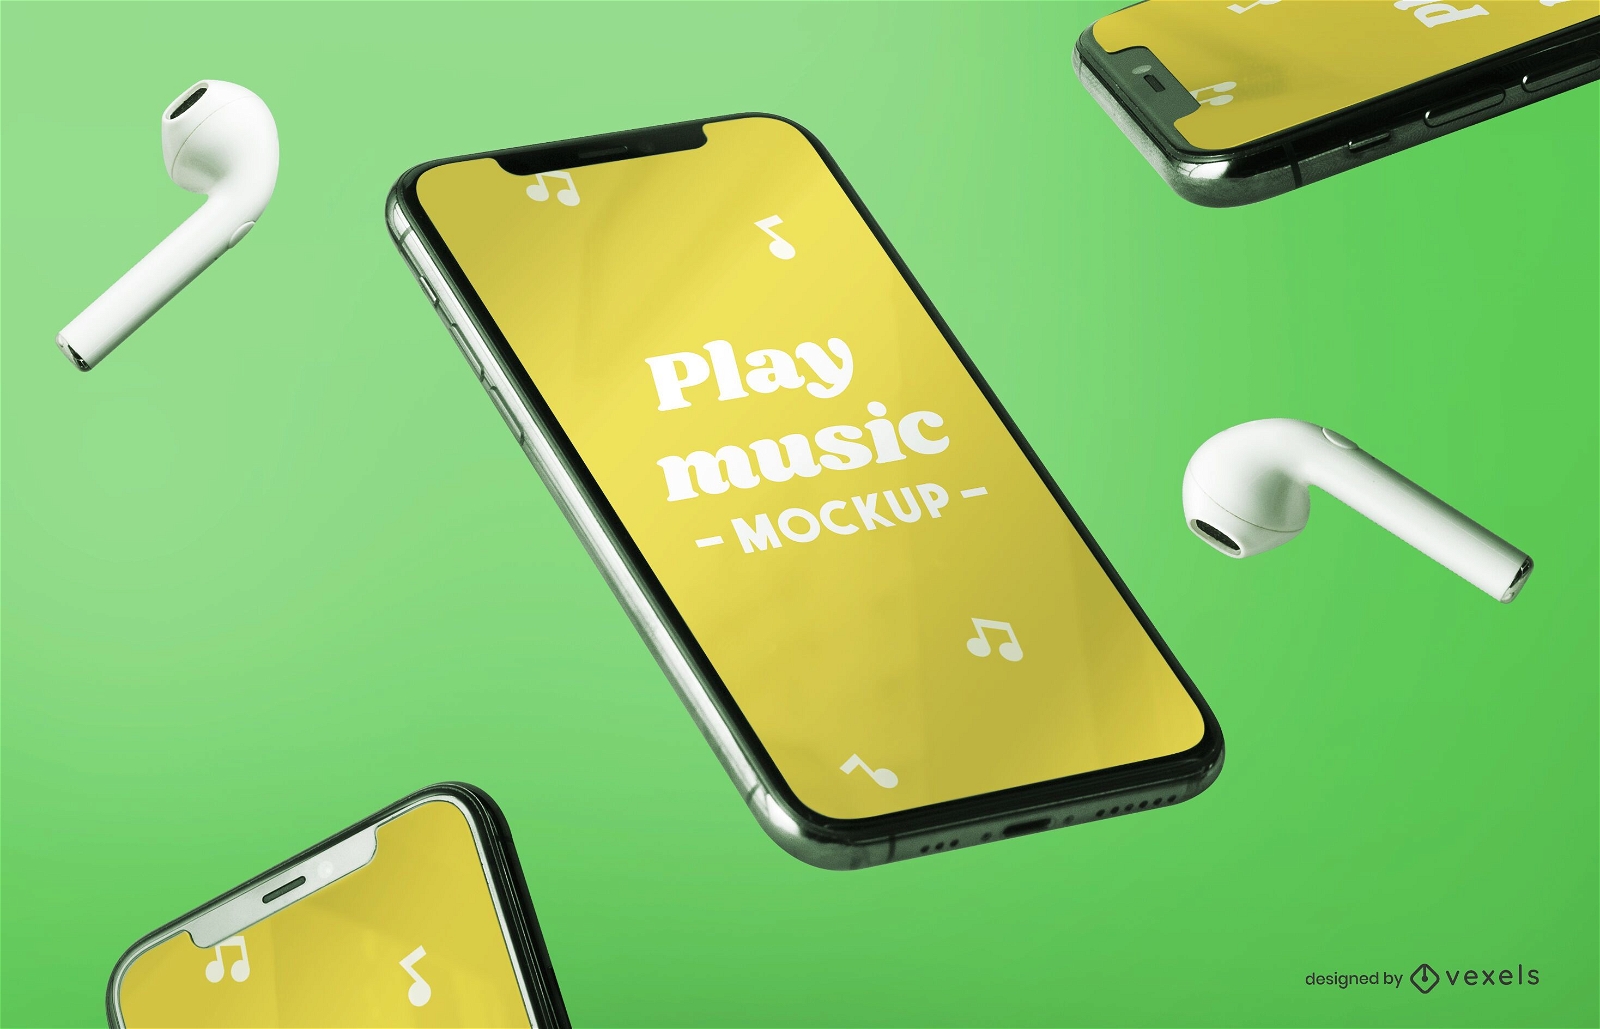 Iphone music mockup composition